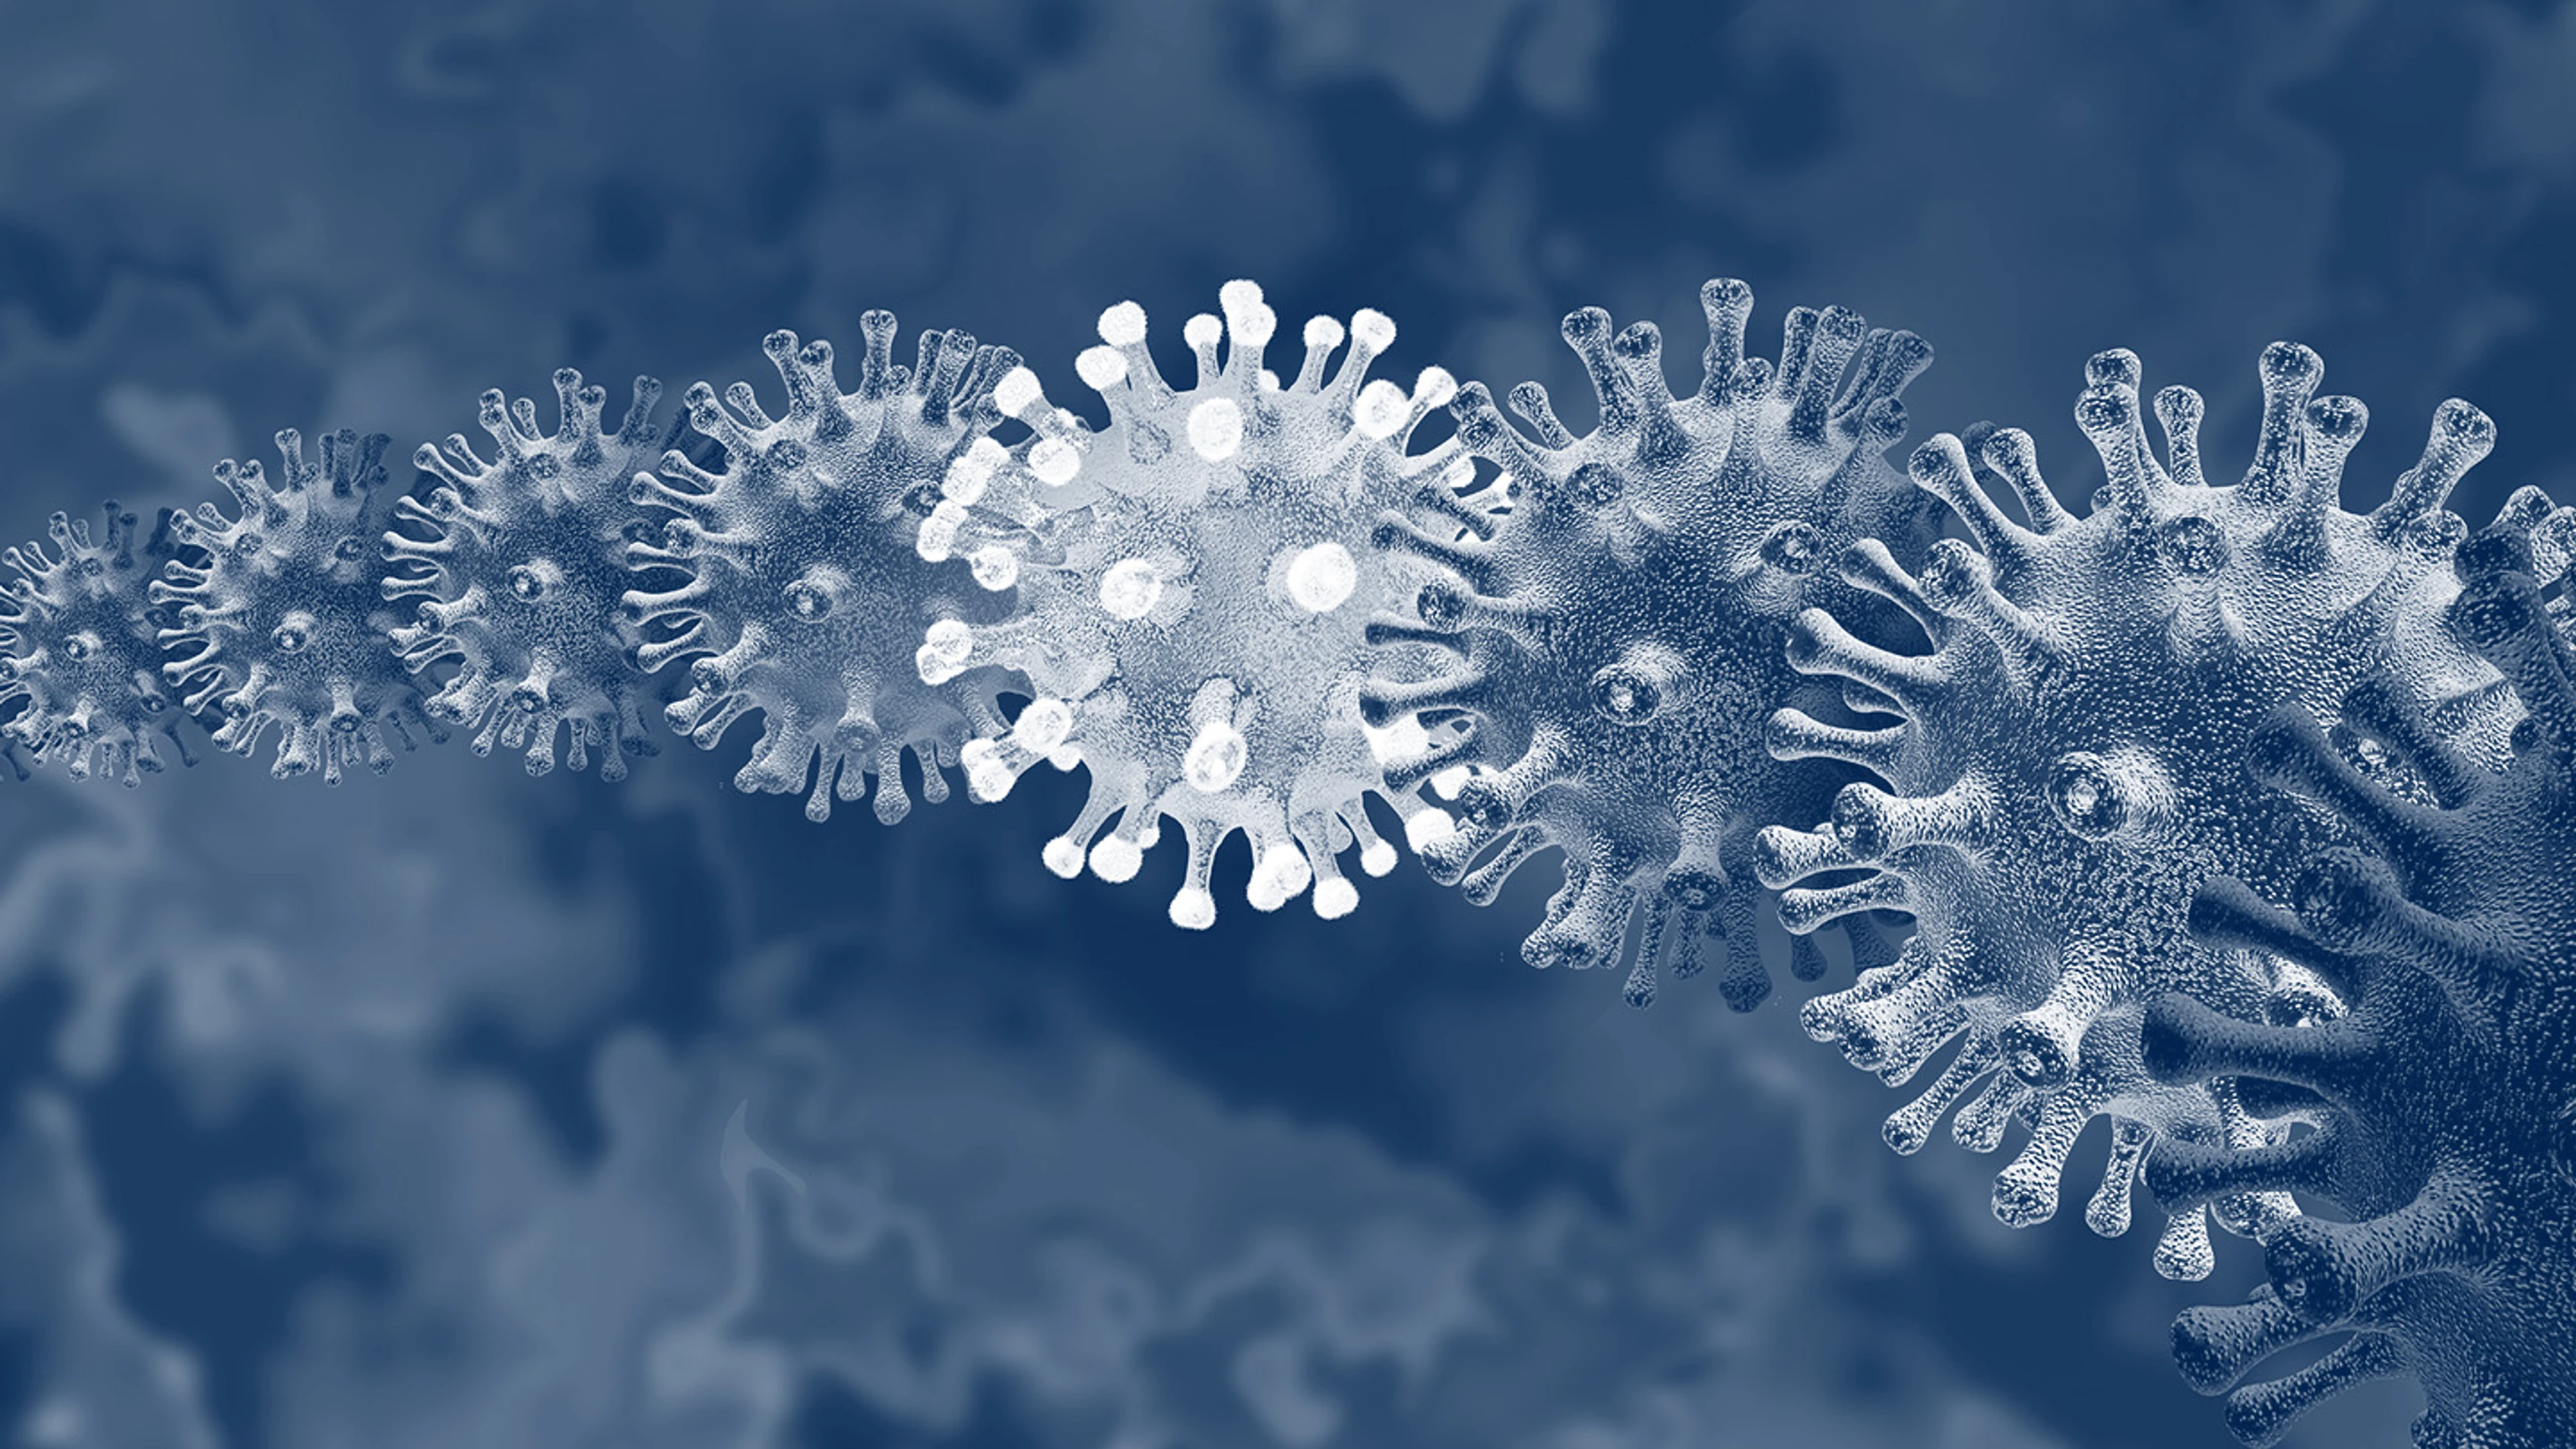 scientific illustration of several covid-19 viruses lined up